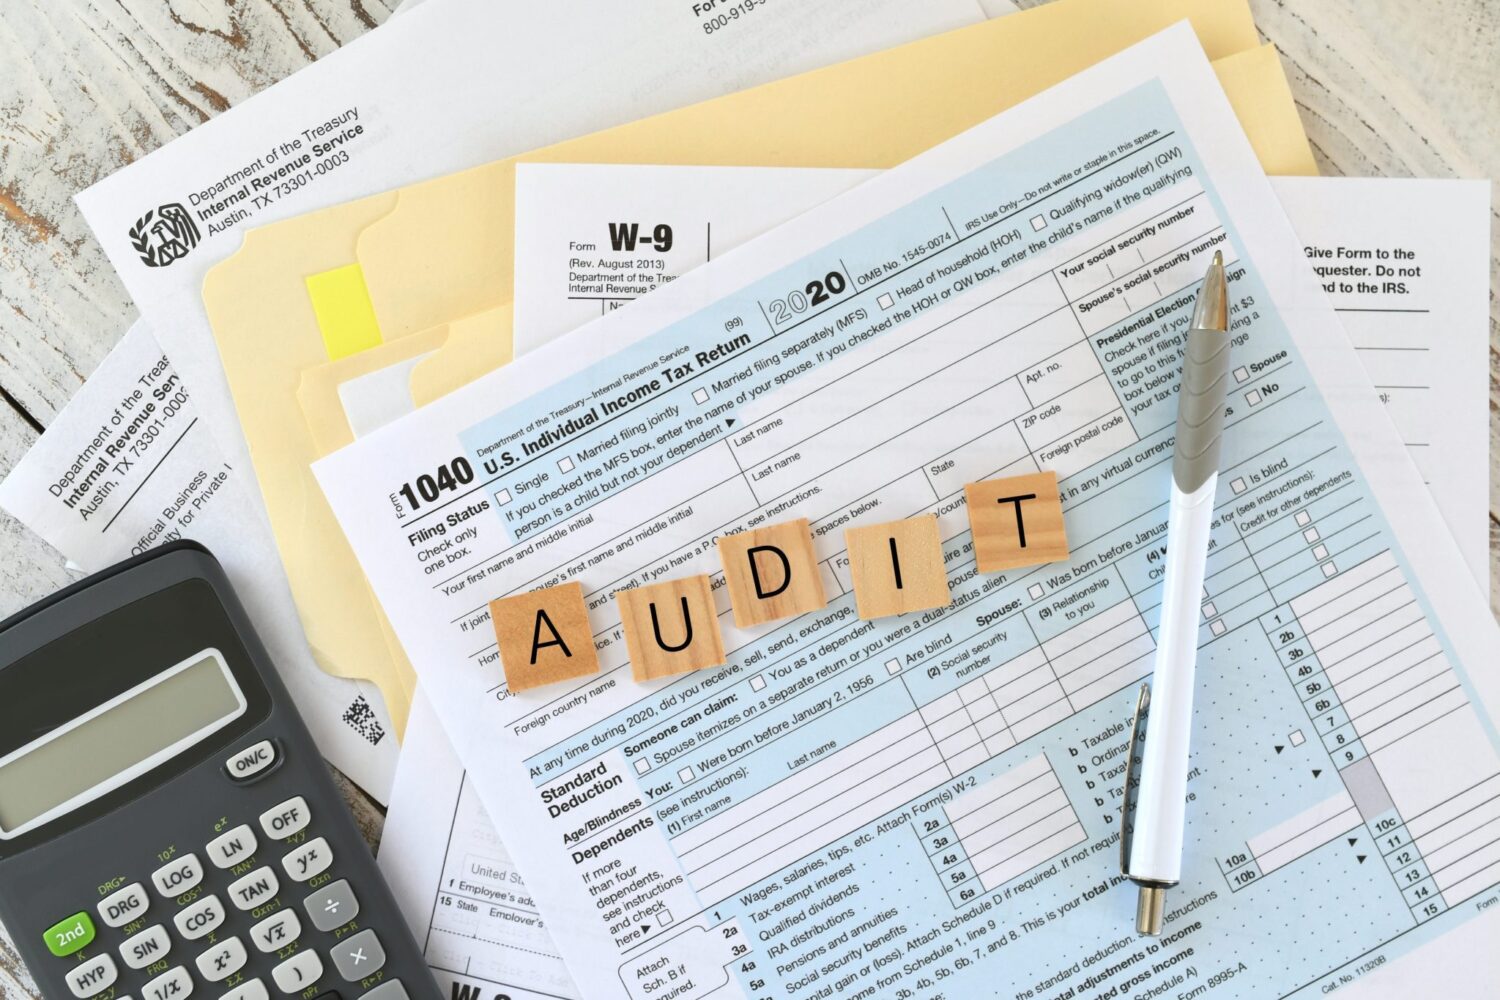 corporate-tax-audits-by-the-irs-fusion-cpa